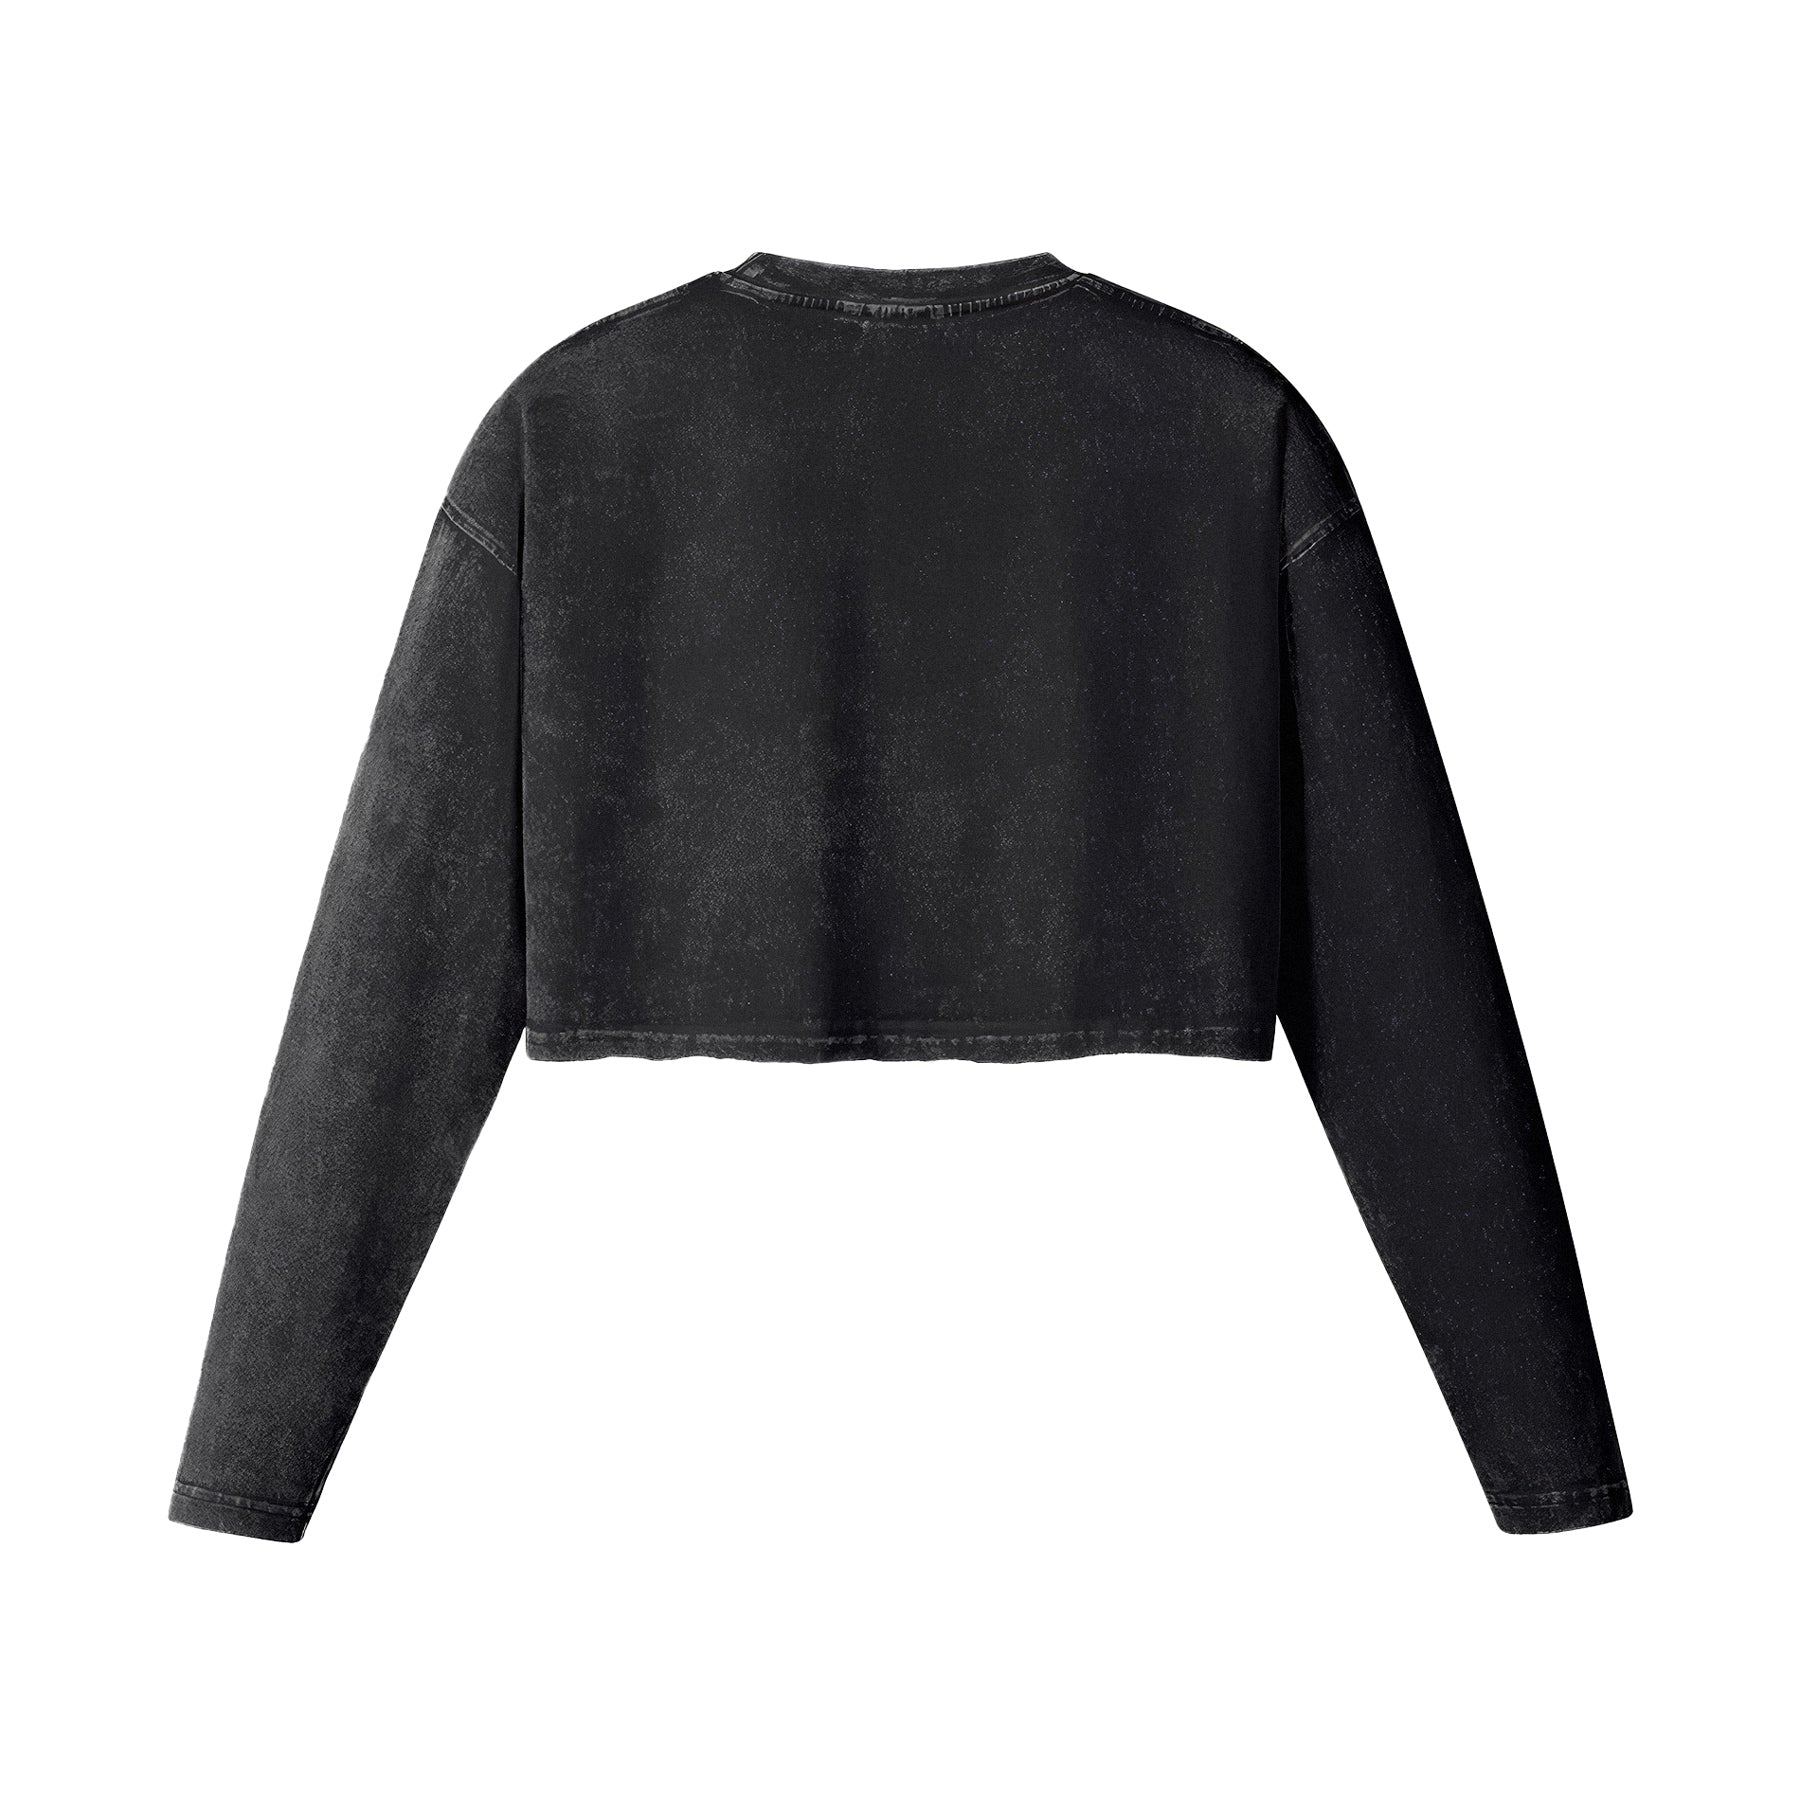 Crafted from a gentle, breathable cotton material, this premium long-sleeve top boasts a cropped design that sits above the waist, creating a stylish silhouette favored by those with a keen eye for fashion. Enhanced by its faded fabric and unfinished hem, it exudes a casual street style essence effortlessly. With its earthy tones, it seamlessly complements various layering options and pairs well with any choice of bottoms.